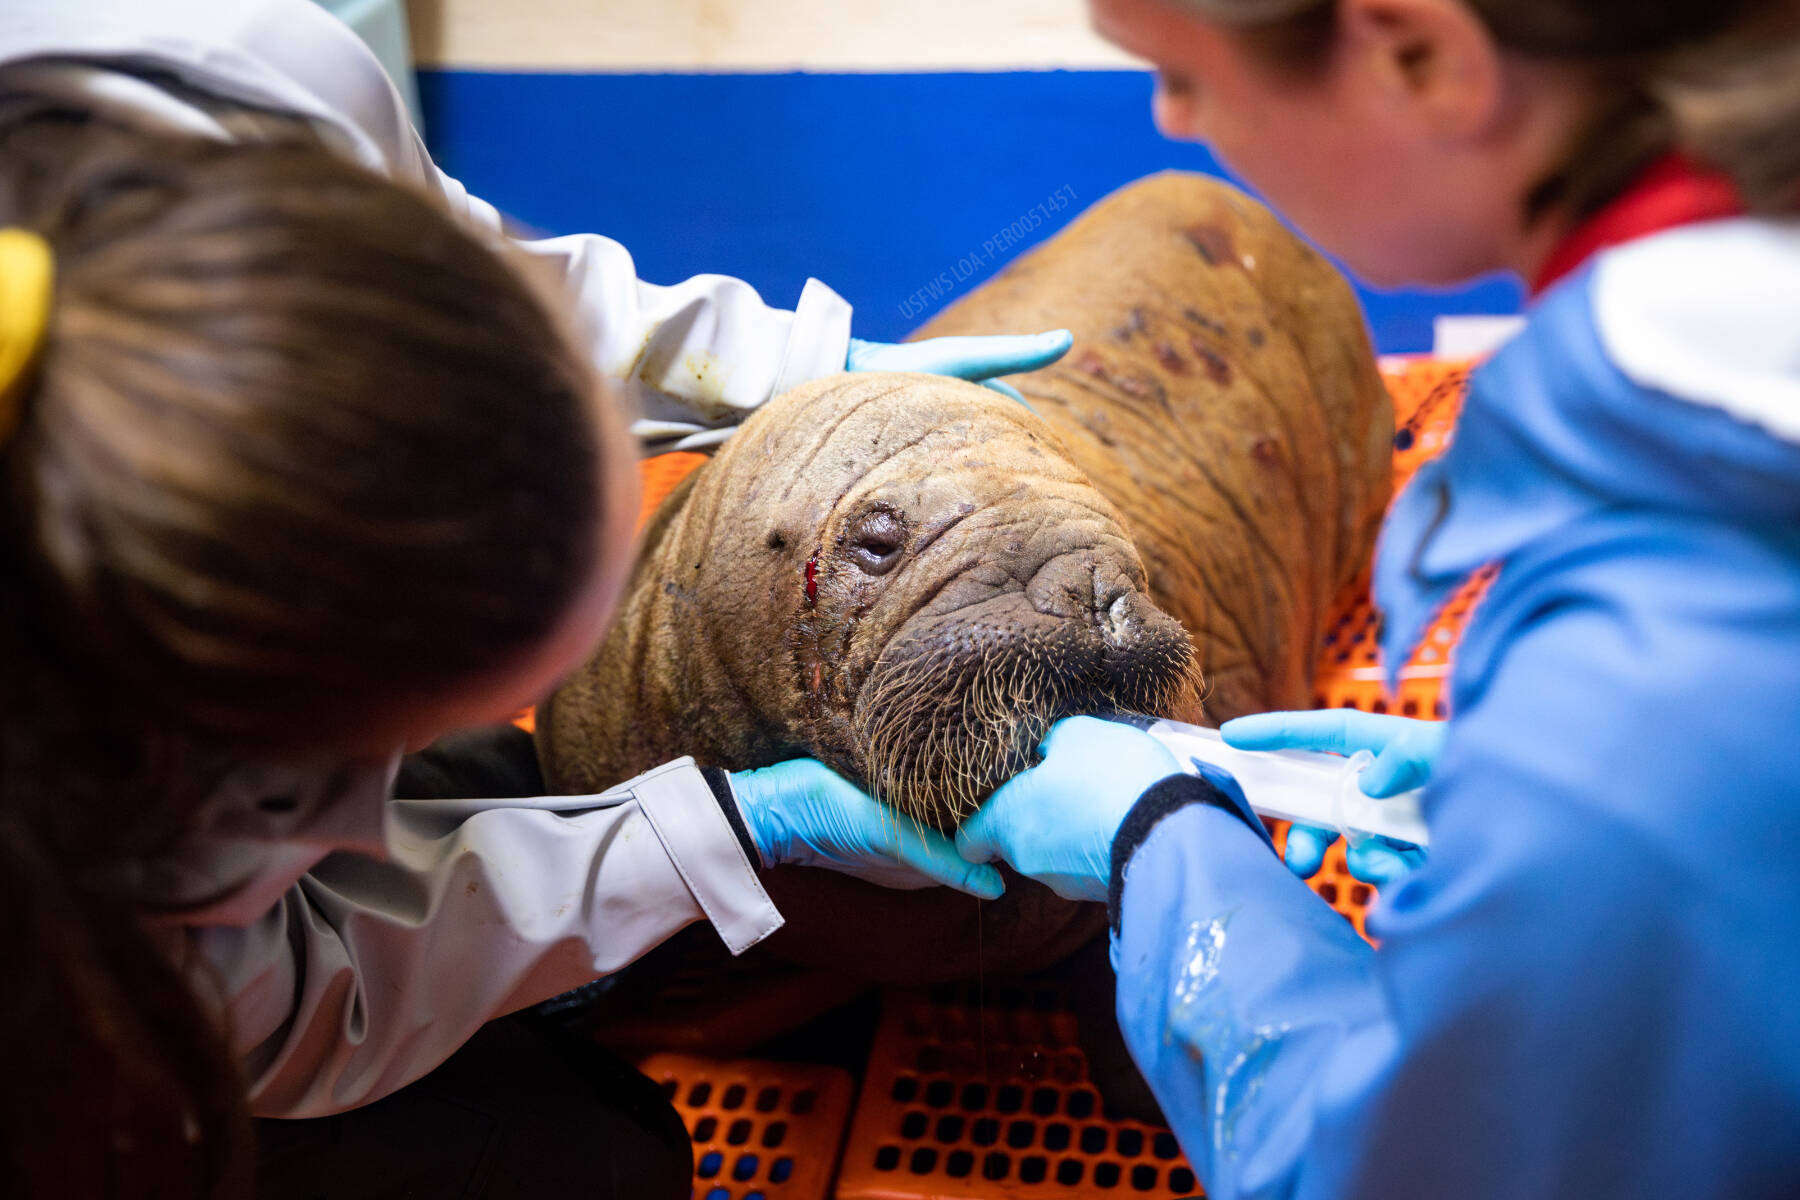 Alaska SeaLife Center Animal Care Specialist Maddie Welch (left) and Veterinary Technician Jessica Davis (right) feeds the orphaned female Pacific walrus calf patient that arrived from Utqiagvik, Alaska on Monday, July 22, 2024. Walruses are rare patients for the Wildlife Response Department, with only eleven total and just one other female since the ASLC opened in 1998. Photo by Kaiti Grant